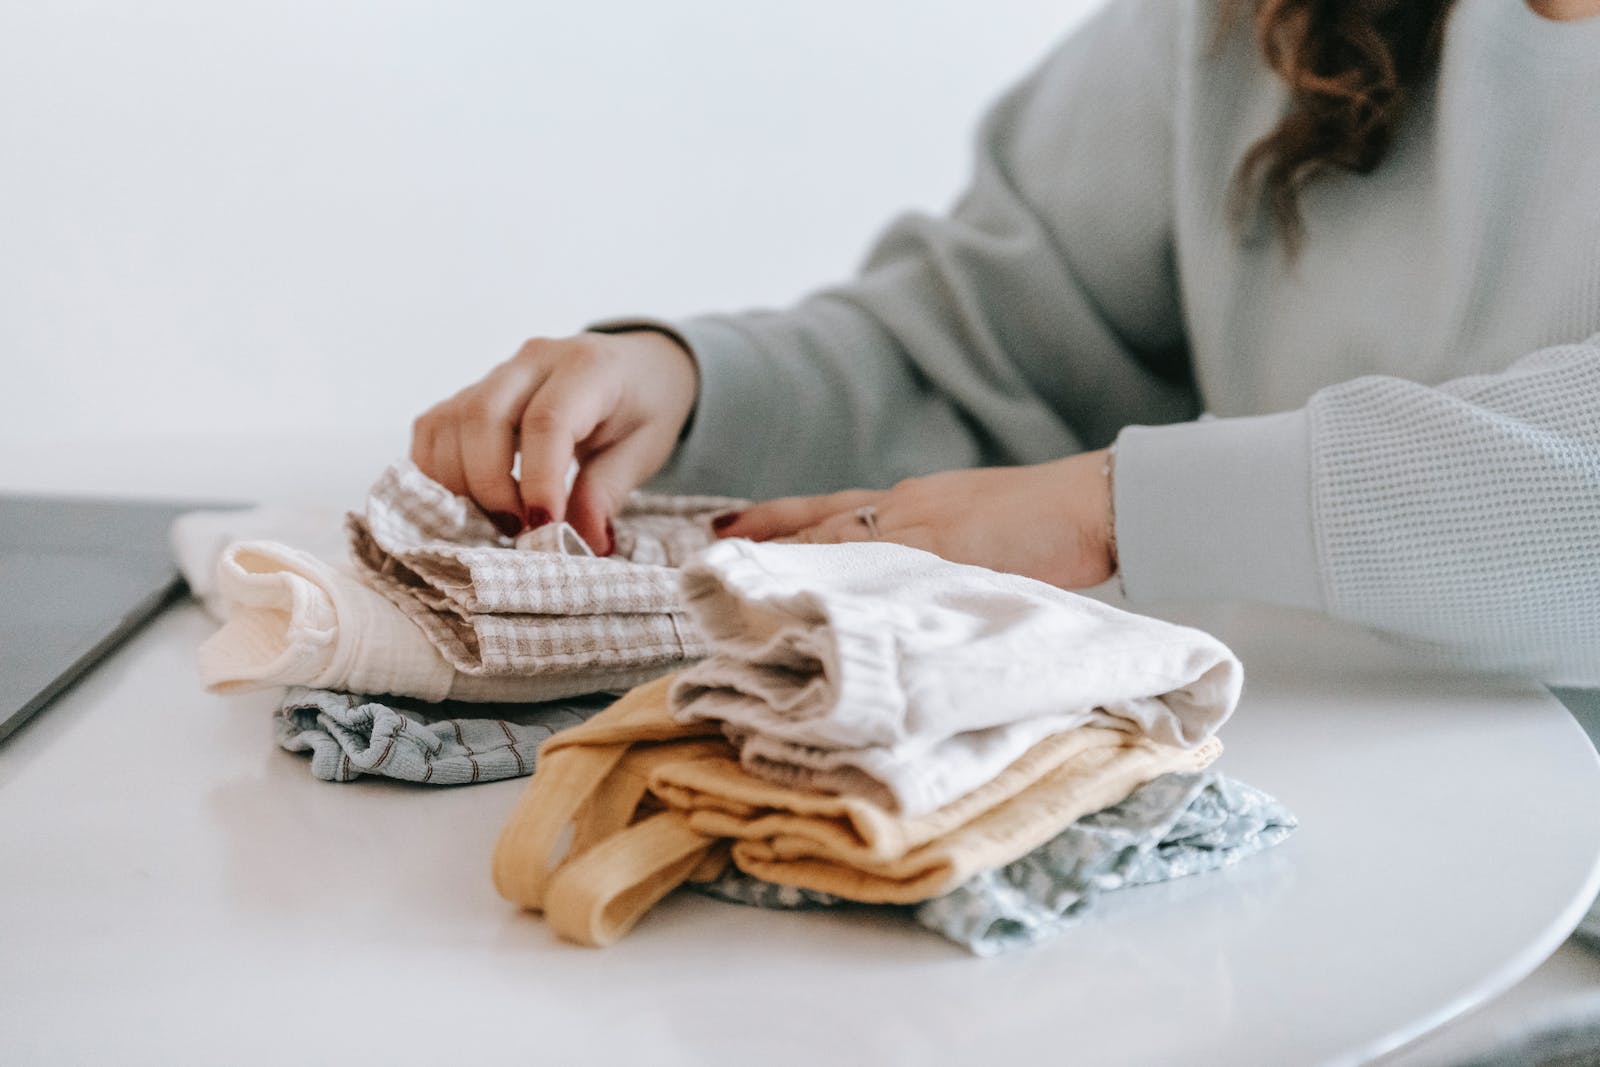 Unrecognizable woman arranging baby clothes at table